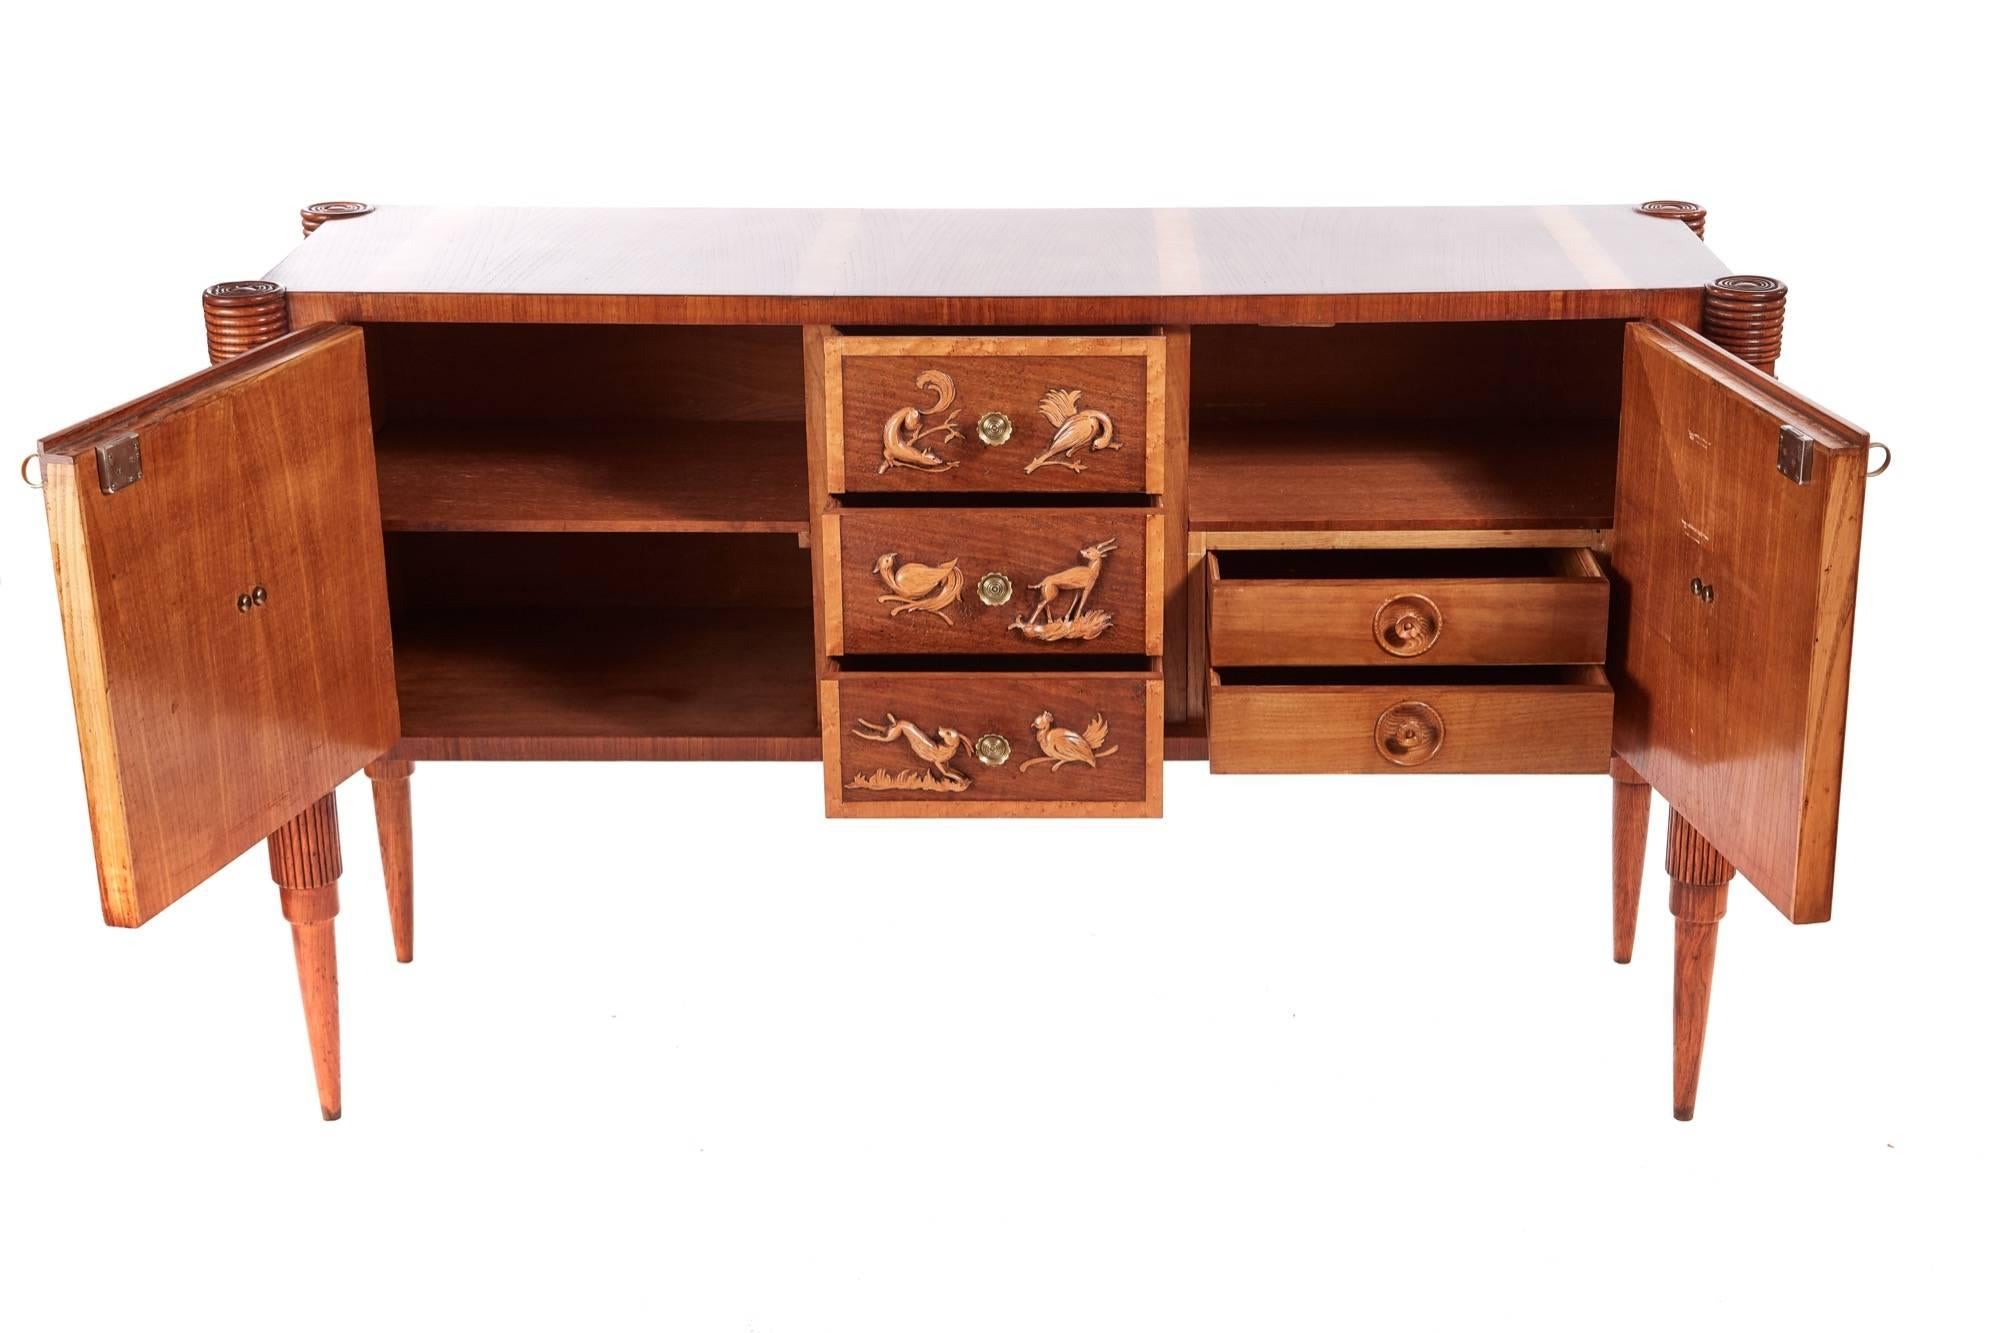 Fantastic Pier Luigi Colli bird's-eye maple sideboard, with a lovely ash top crossbanded in bird's-eye maple turned rings to the corners, two bird's-eye maple veneer doors, three centre drawers, with unusual quality carvings of birds, deer, hare and